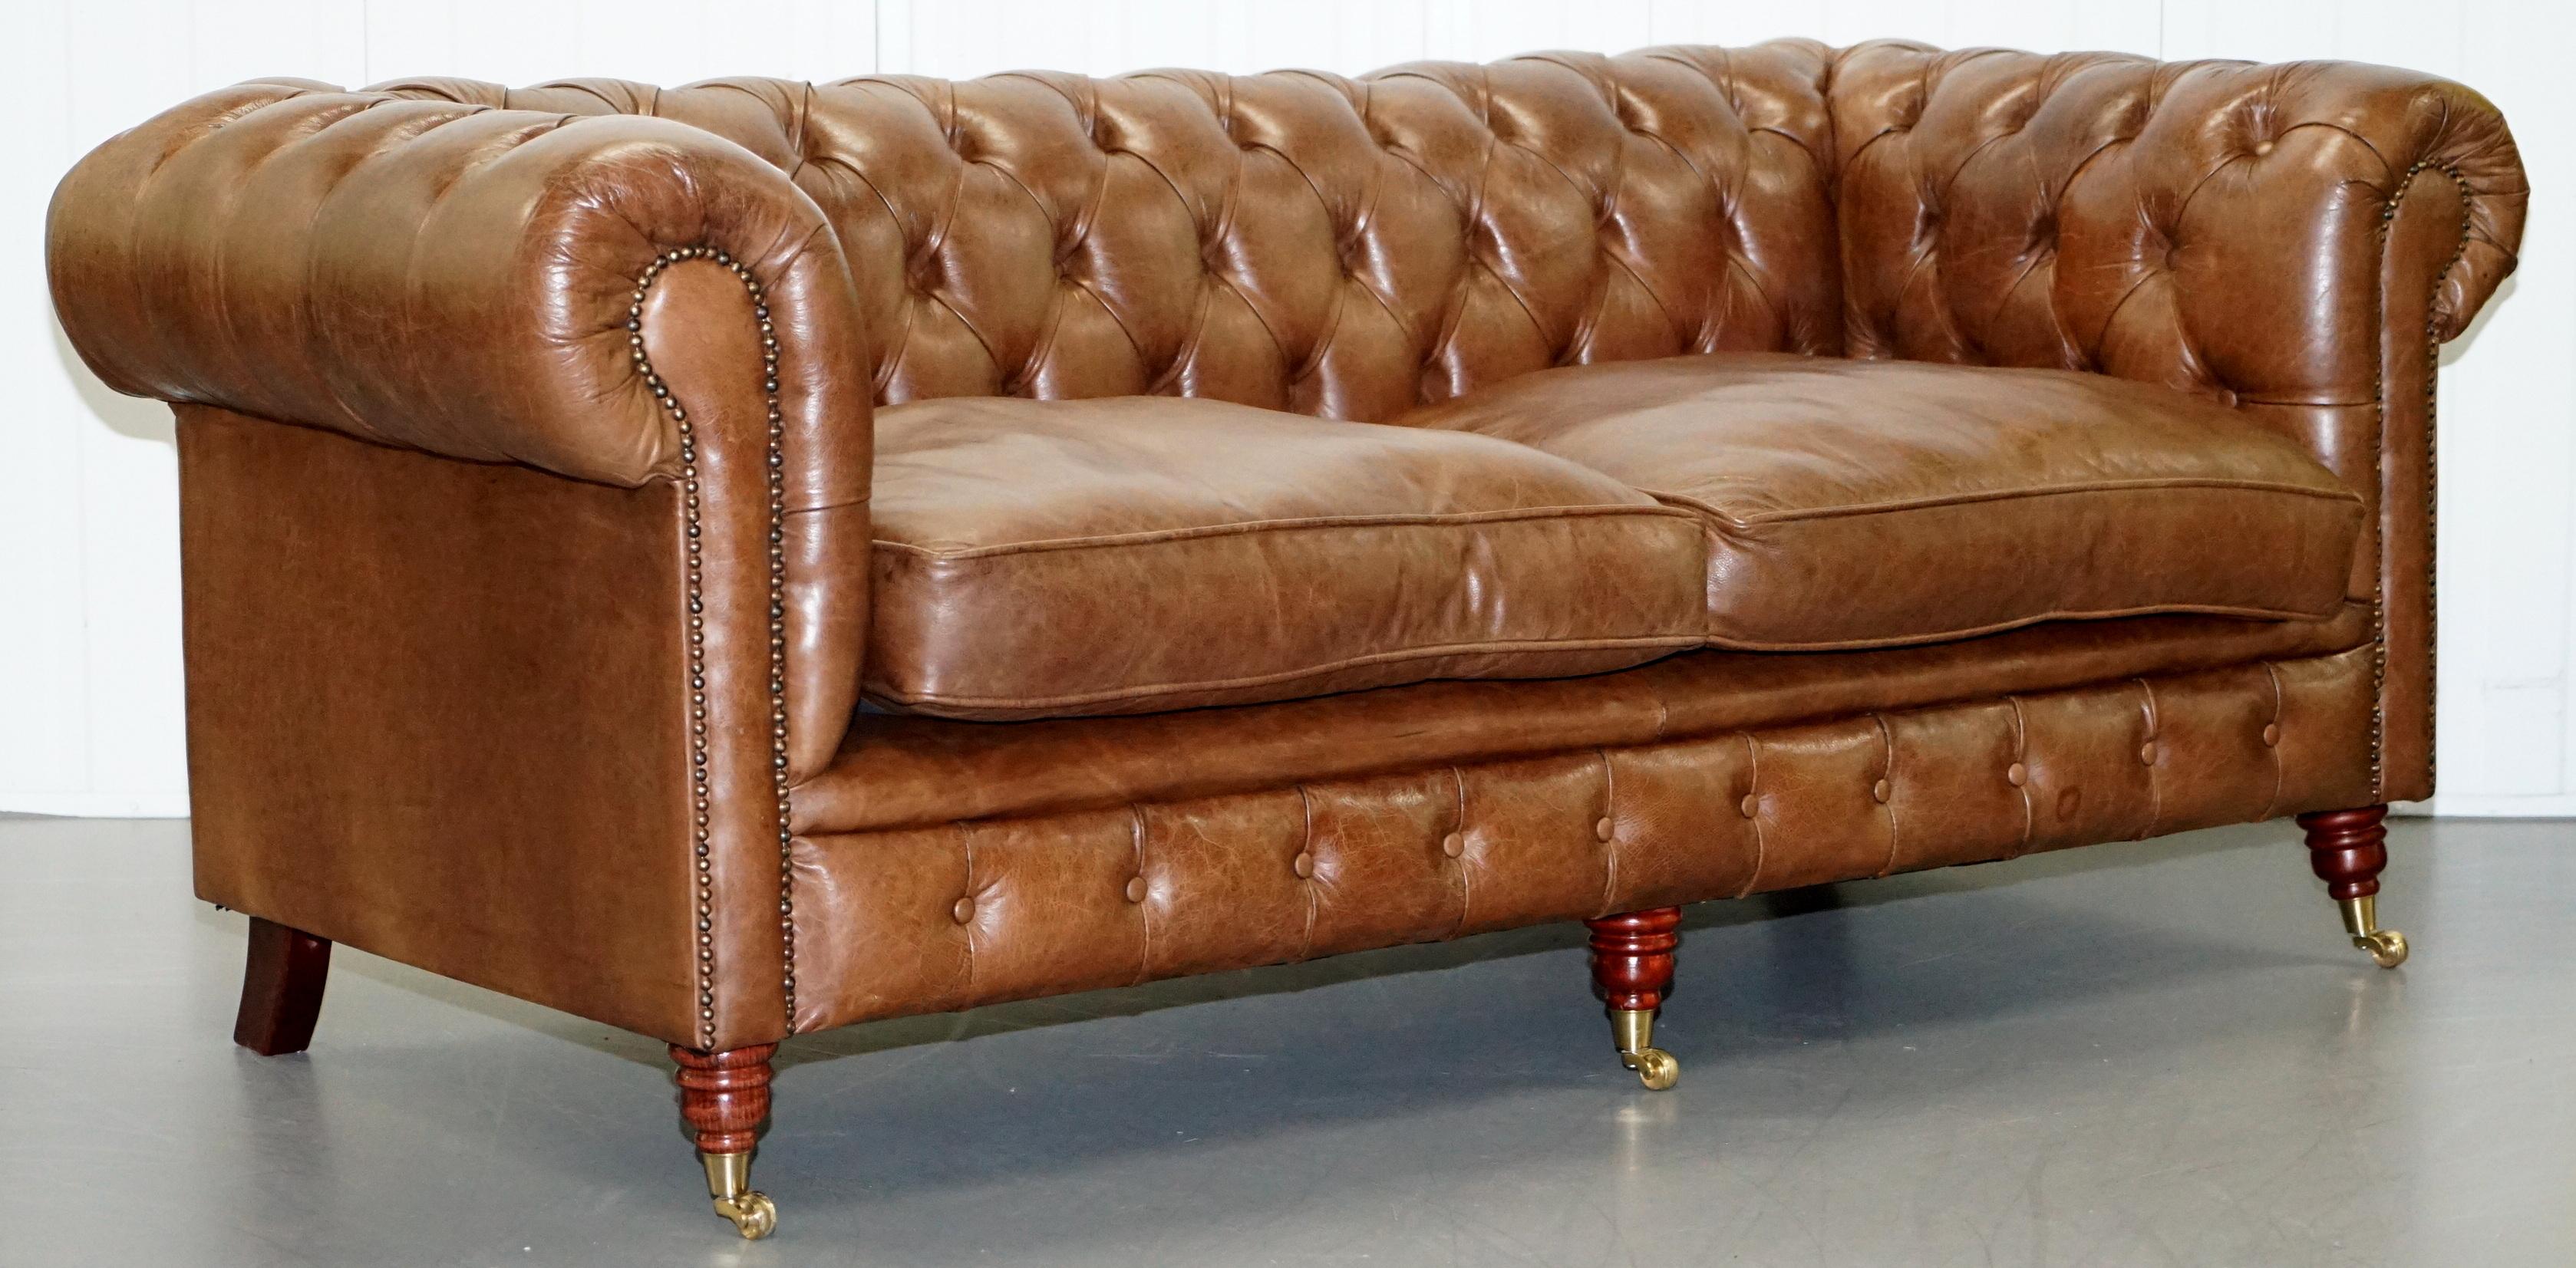 We are delighted to this stunning Heritage brown leather Chesterfield suite of sofas with armchair

A very good looking and well made suite in lovely condition throughout, the small sofa seats 3 people comfortably, the larger 4 people, the